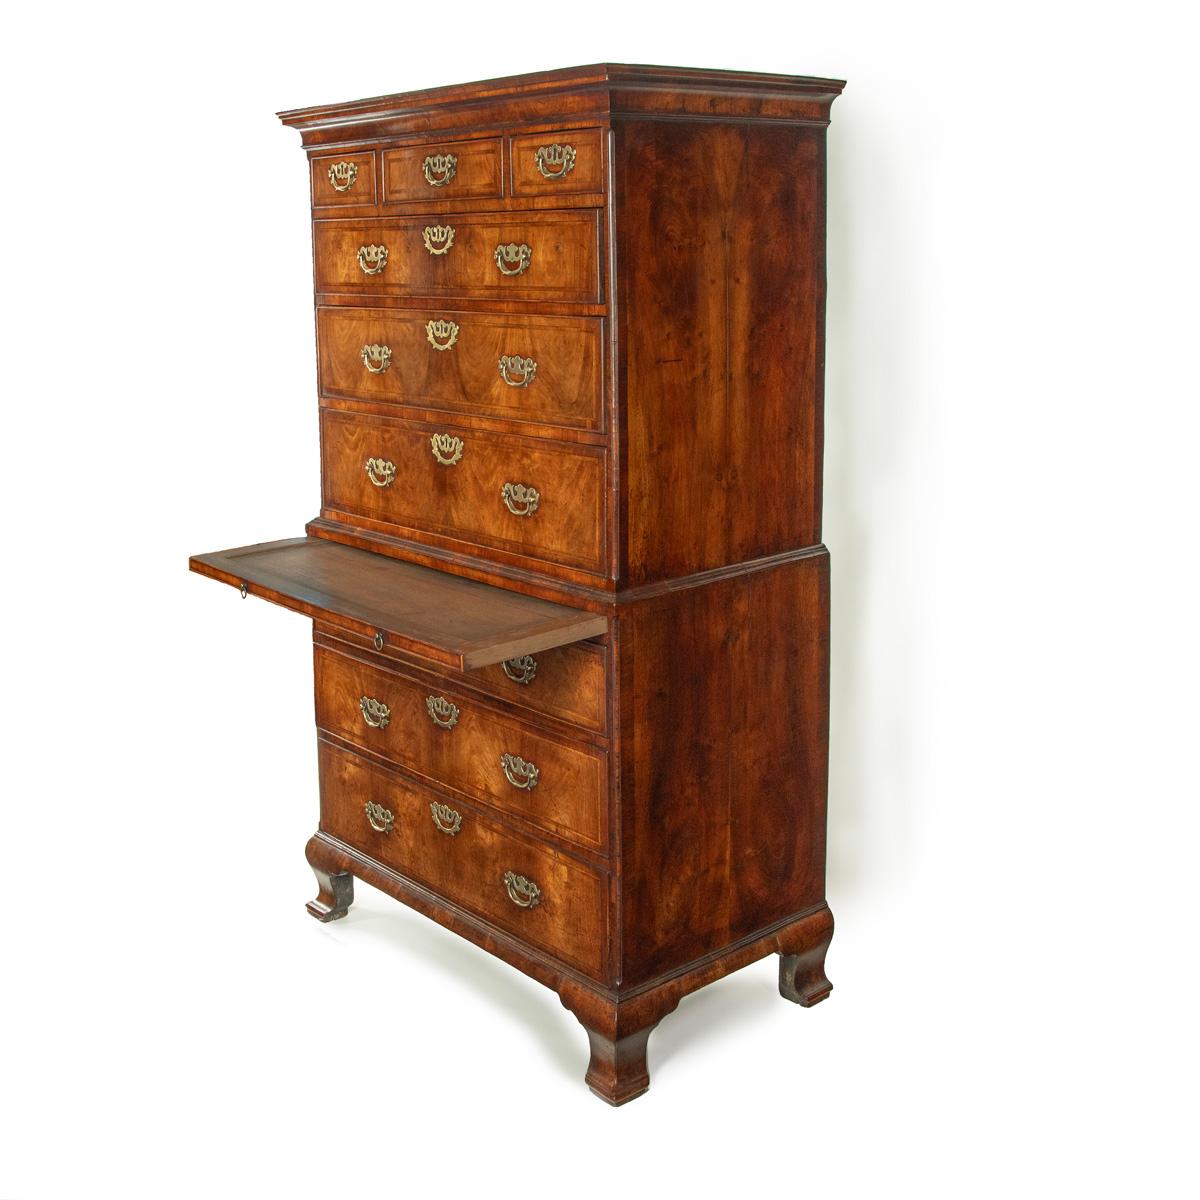 A very fine George I walnut tallboy, of typical rectangular form with a wide base containing three graduated long drawers and a narrower upper section with three further long drawers and three short drawers below a shaped cornice, all raised on a